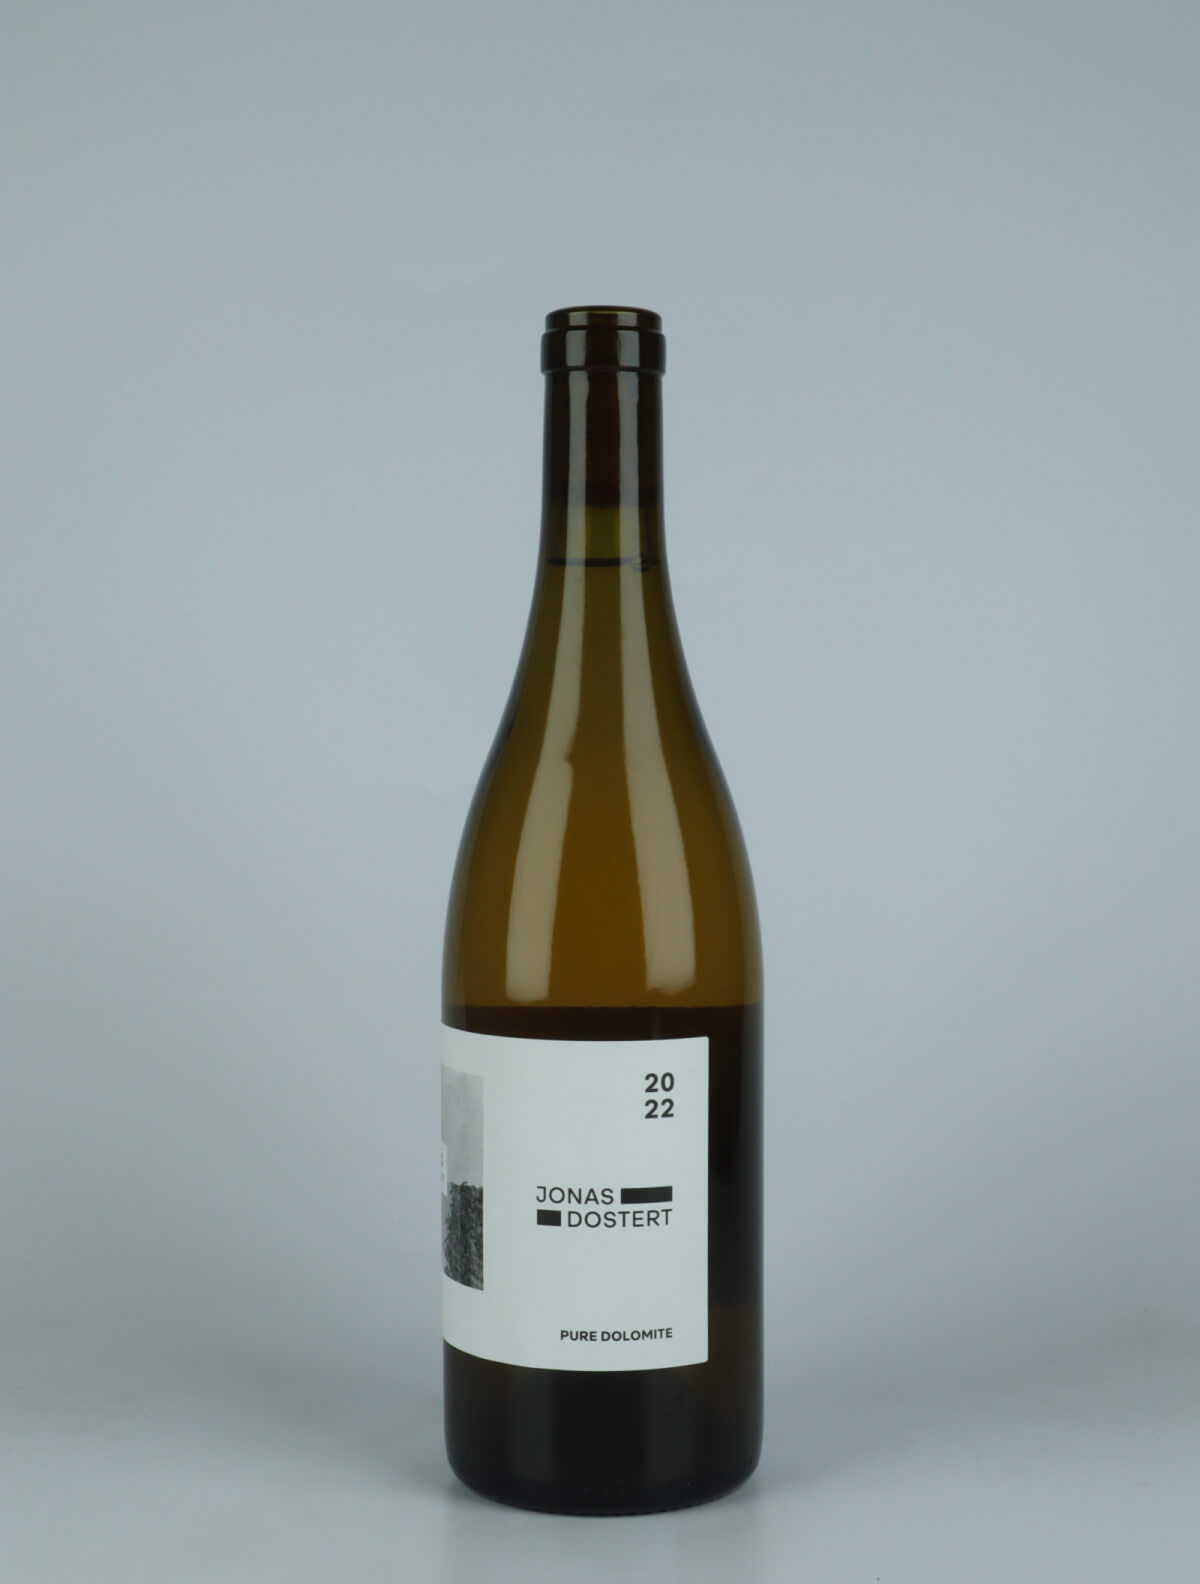 A bottle 2022 Pure Dolomite White wine from Jonas Dostert, Mosel in Germany